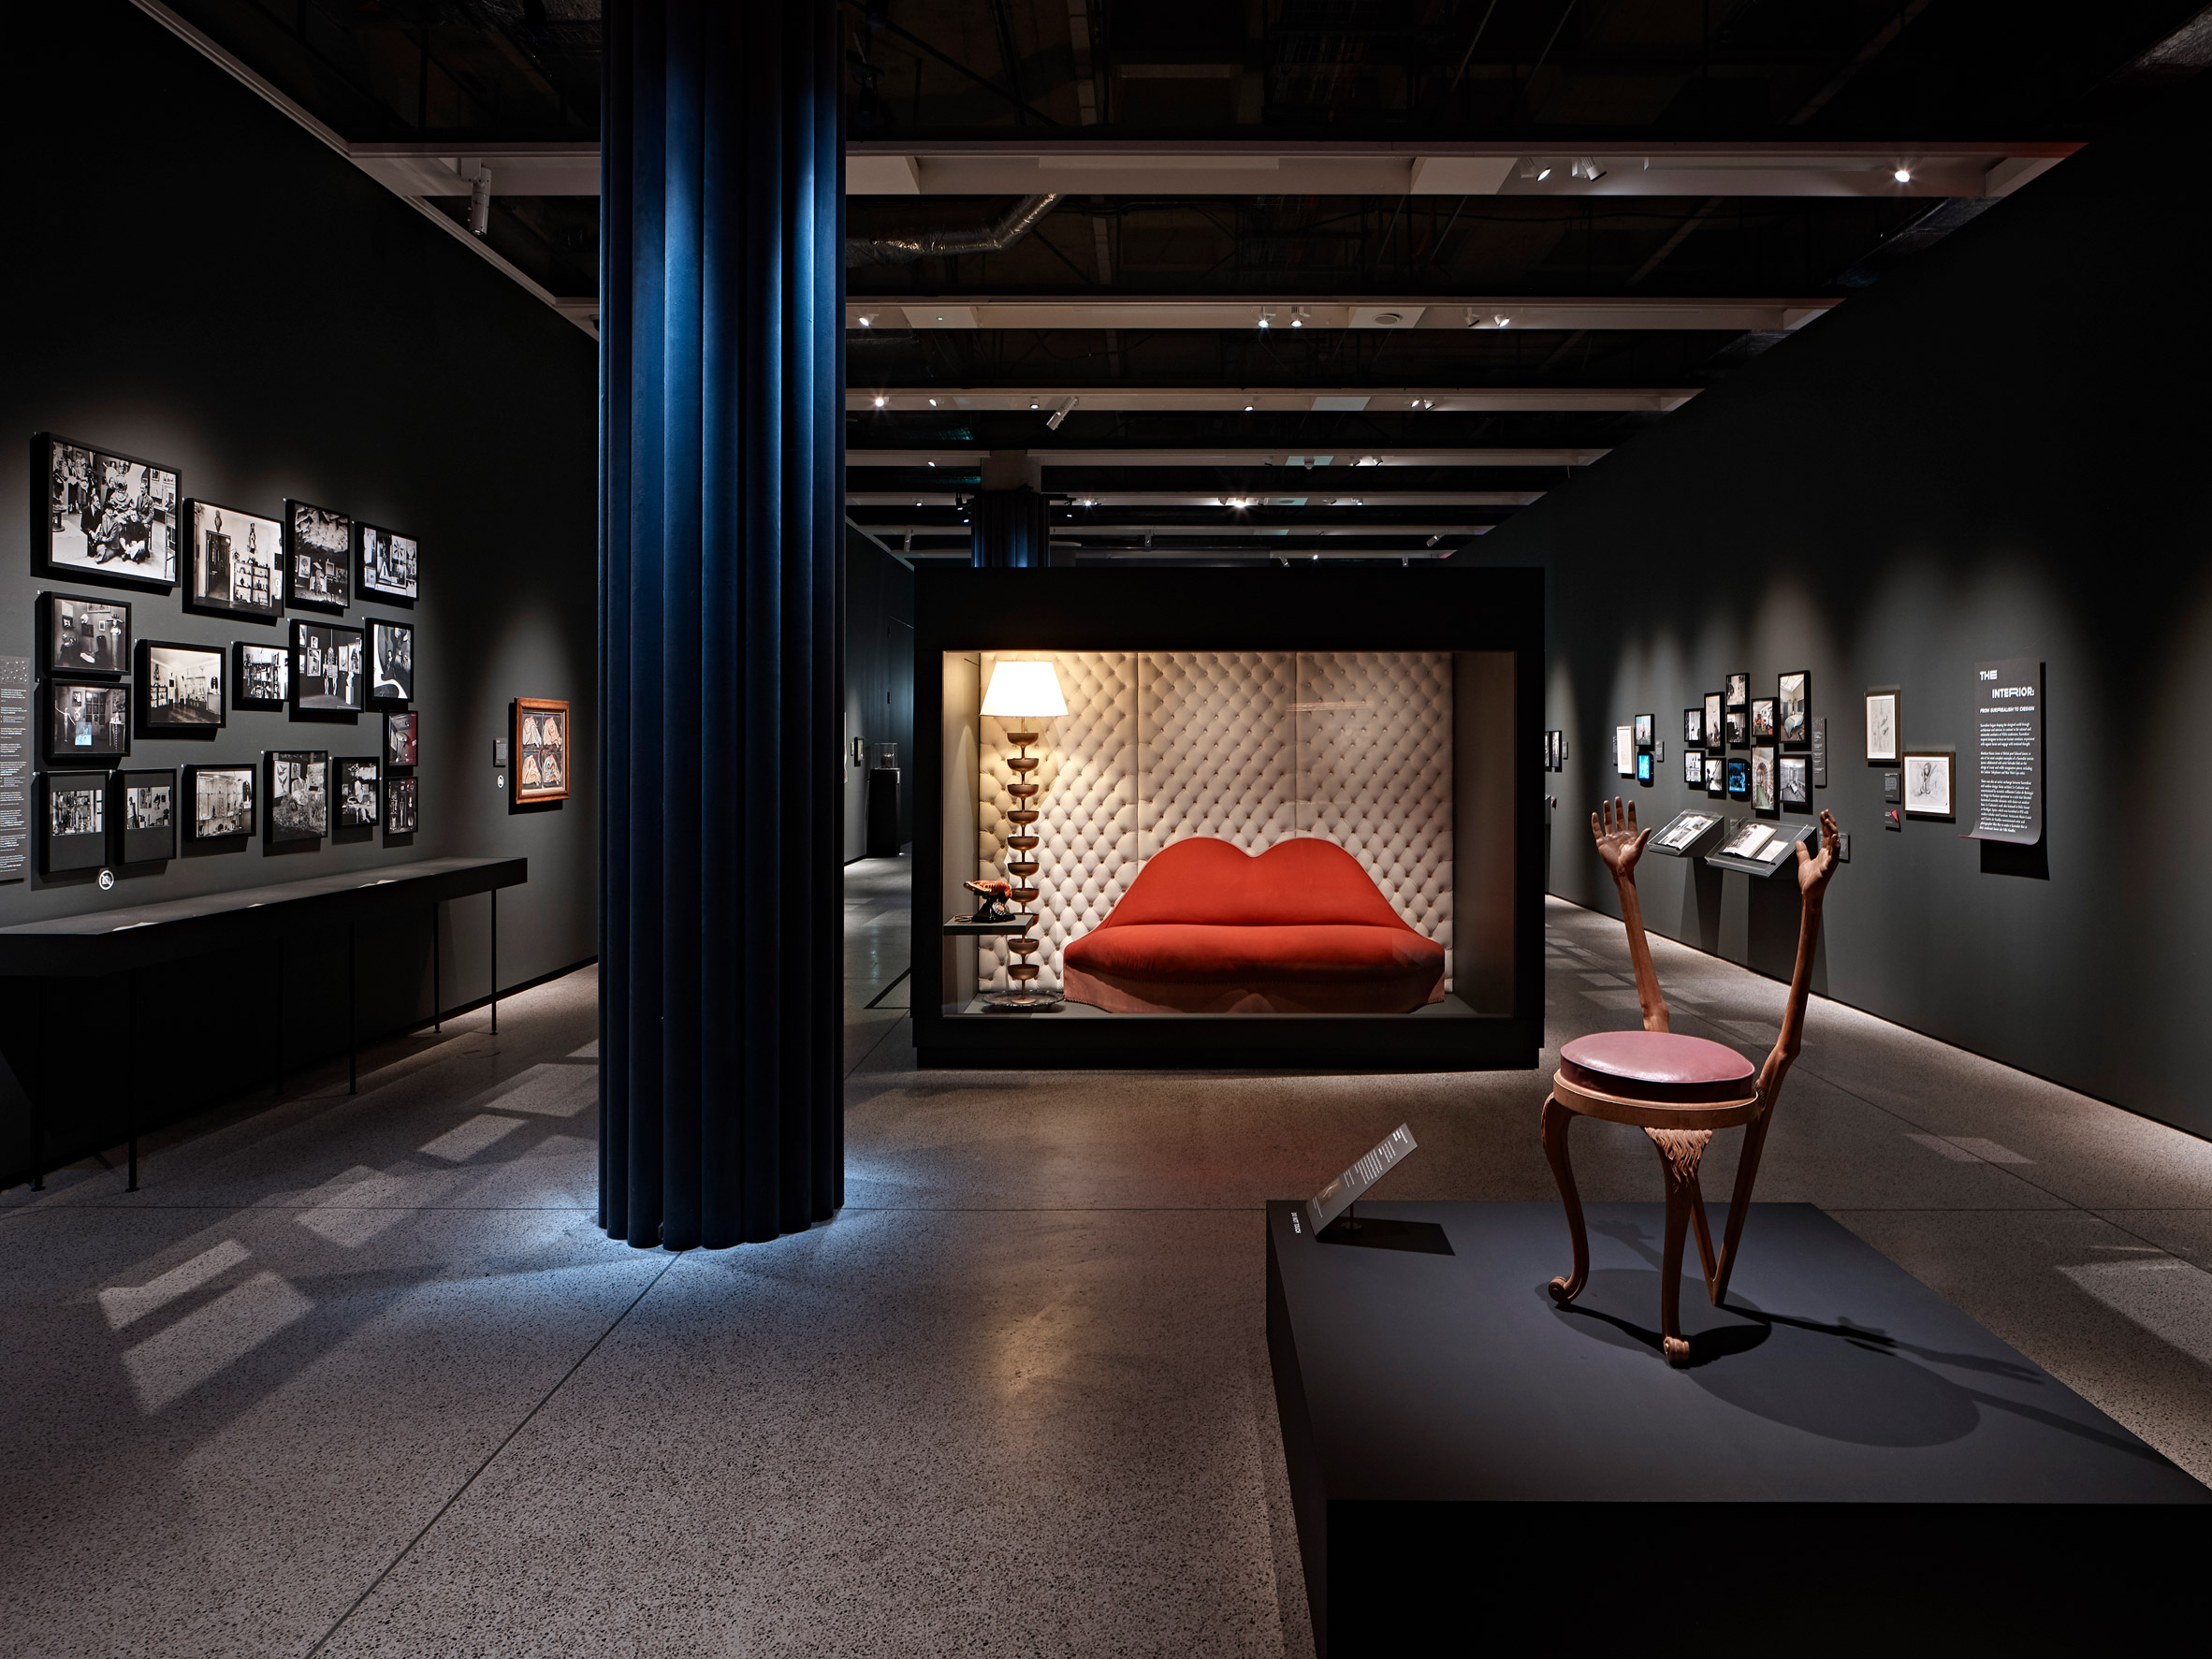 Salvador Dalí's Mae West Lips sofa on display in the exhibition